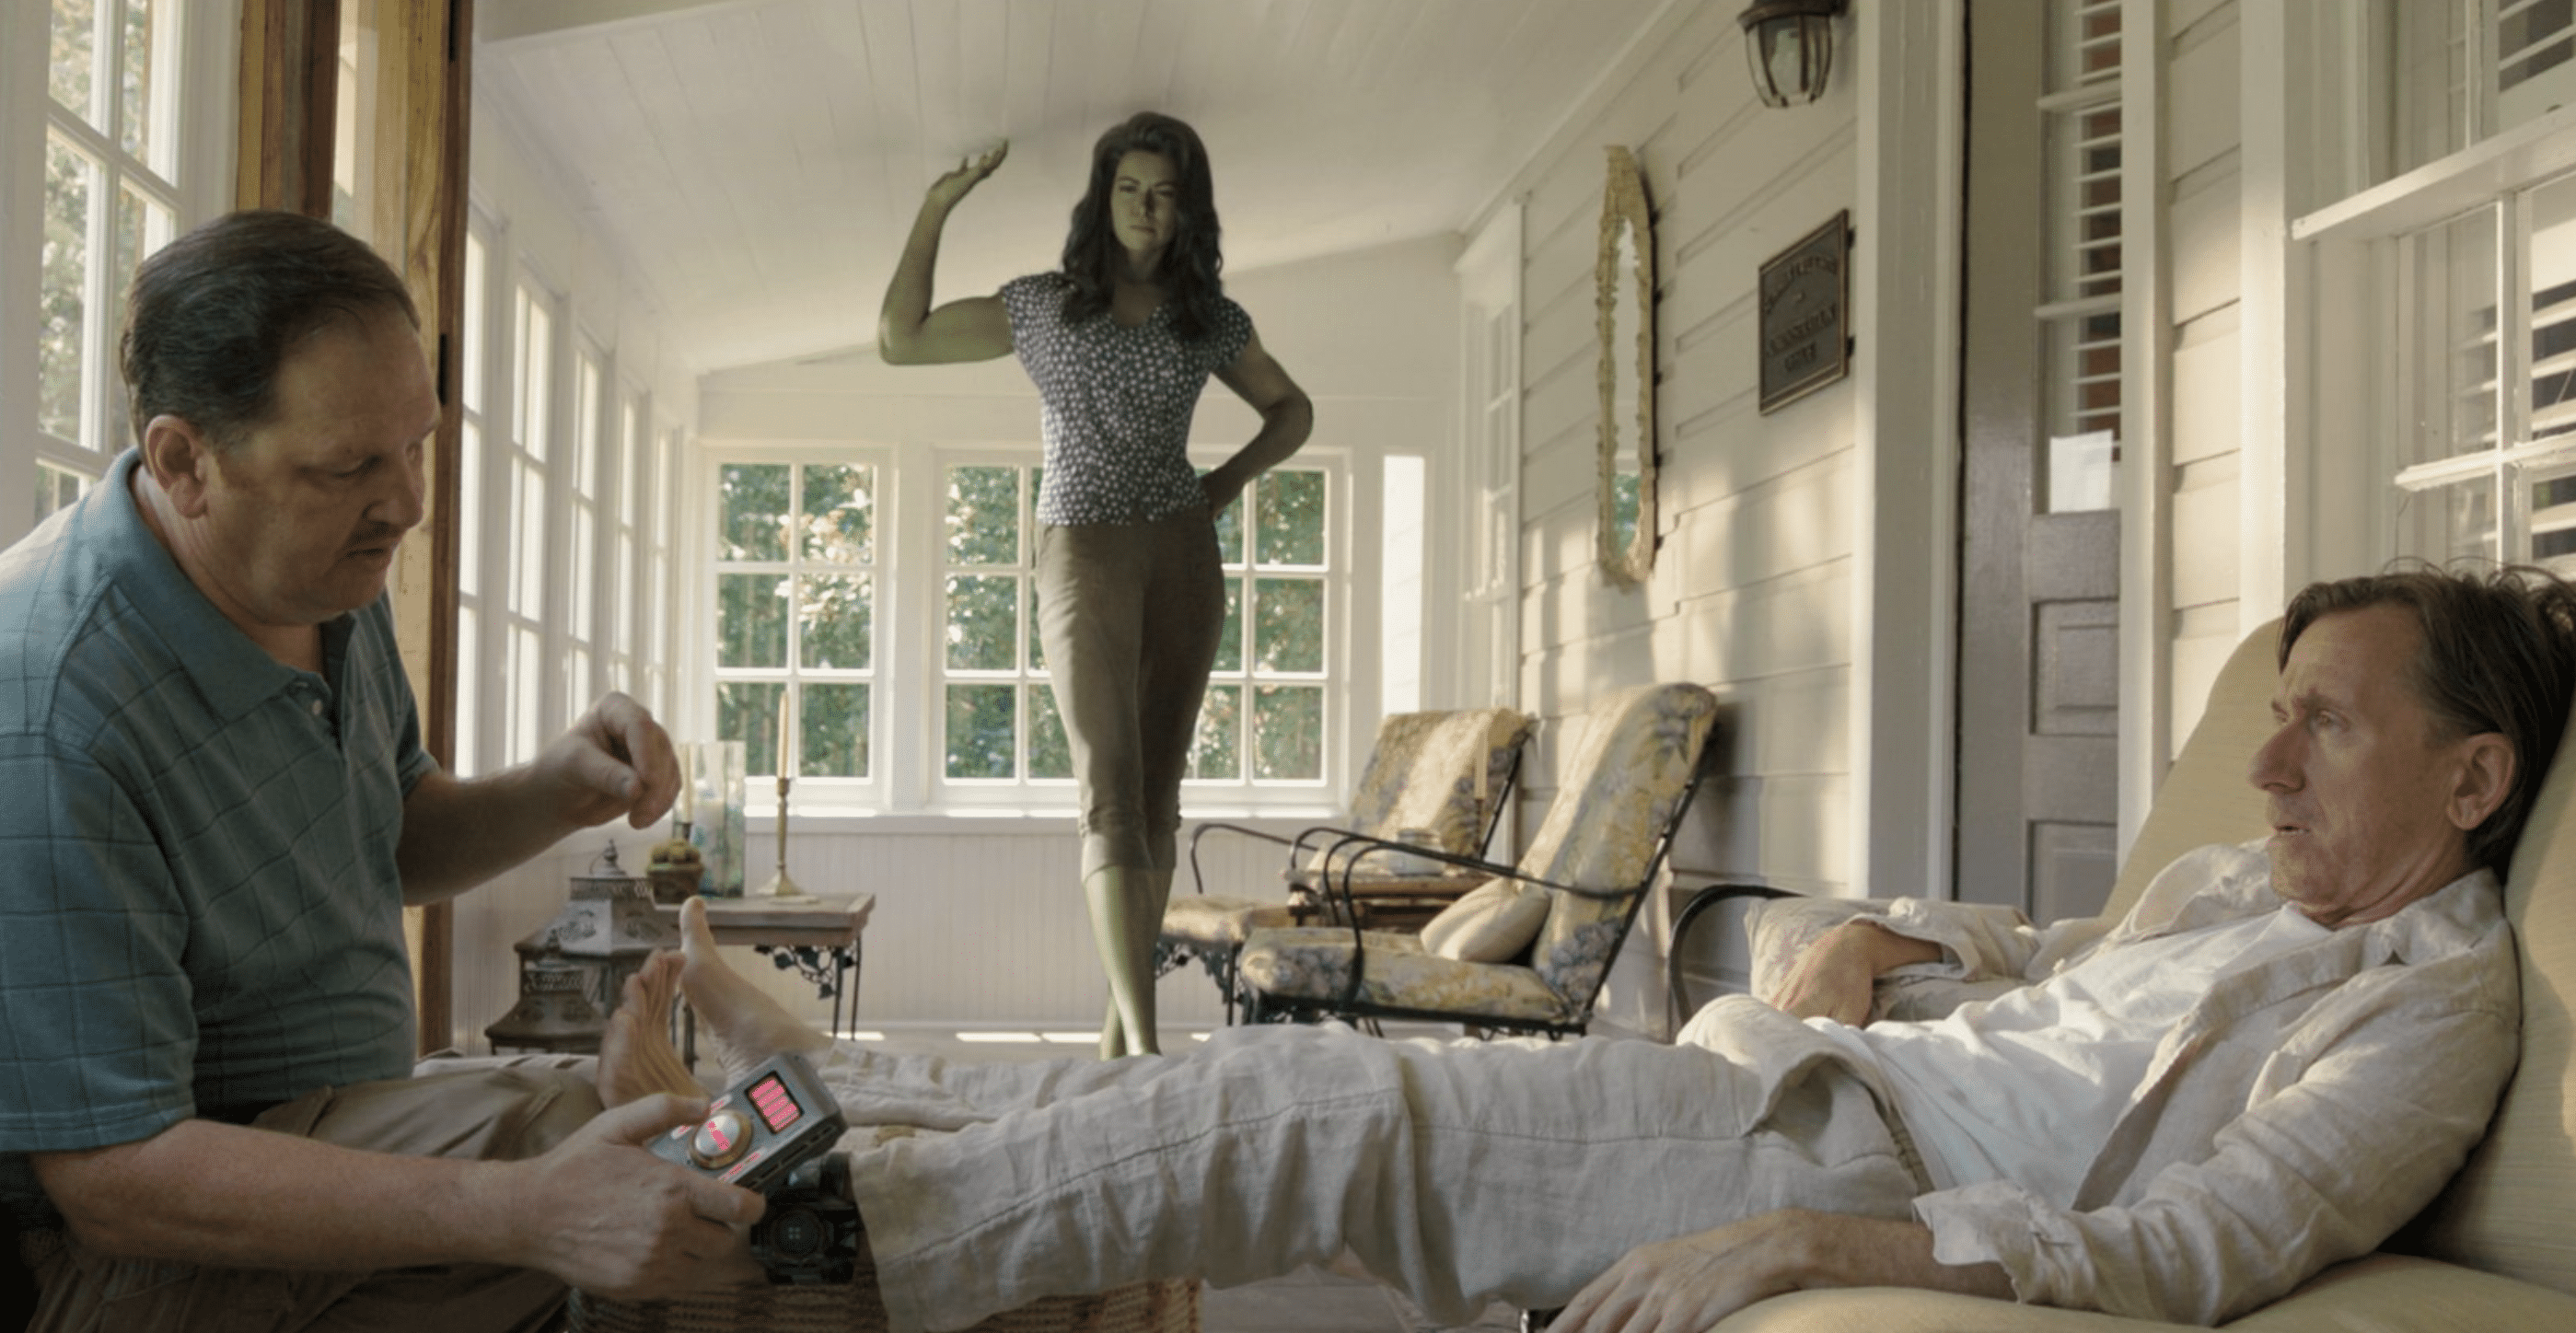 She-Hulk, a giant green superhuman, stands in a sunny room while a lounging man in linen clothes gets his ankle monitor checked.